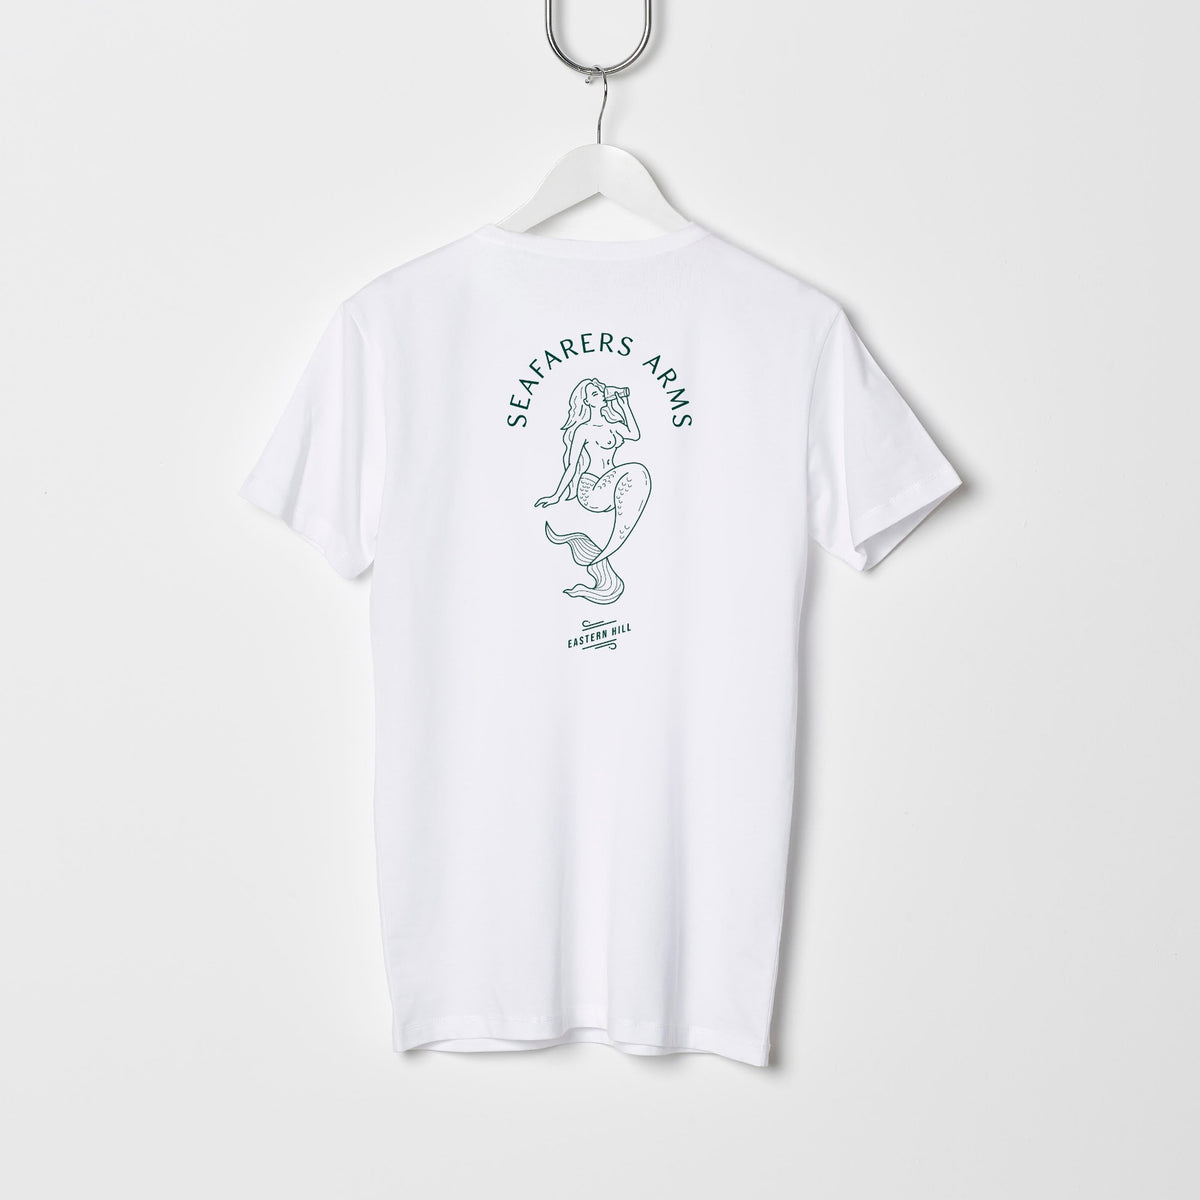 Eastern Hill General Supplies Seafarer&#39;s Arms Tee - White/Emerald